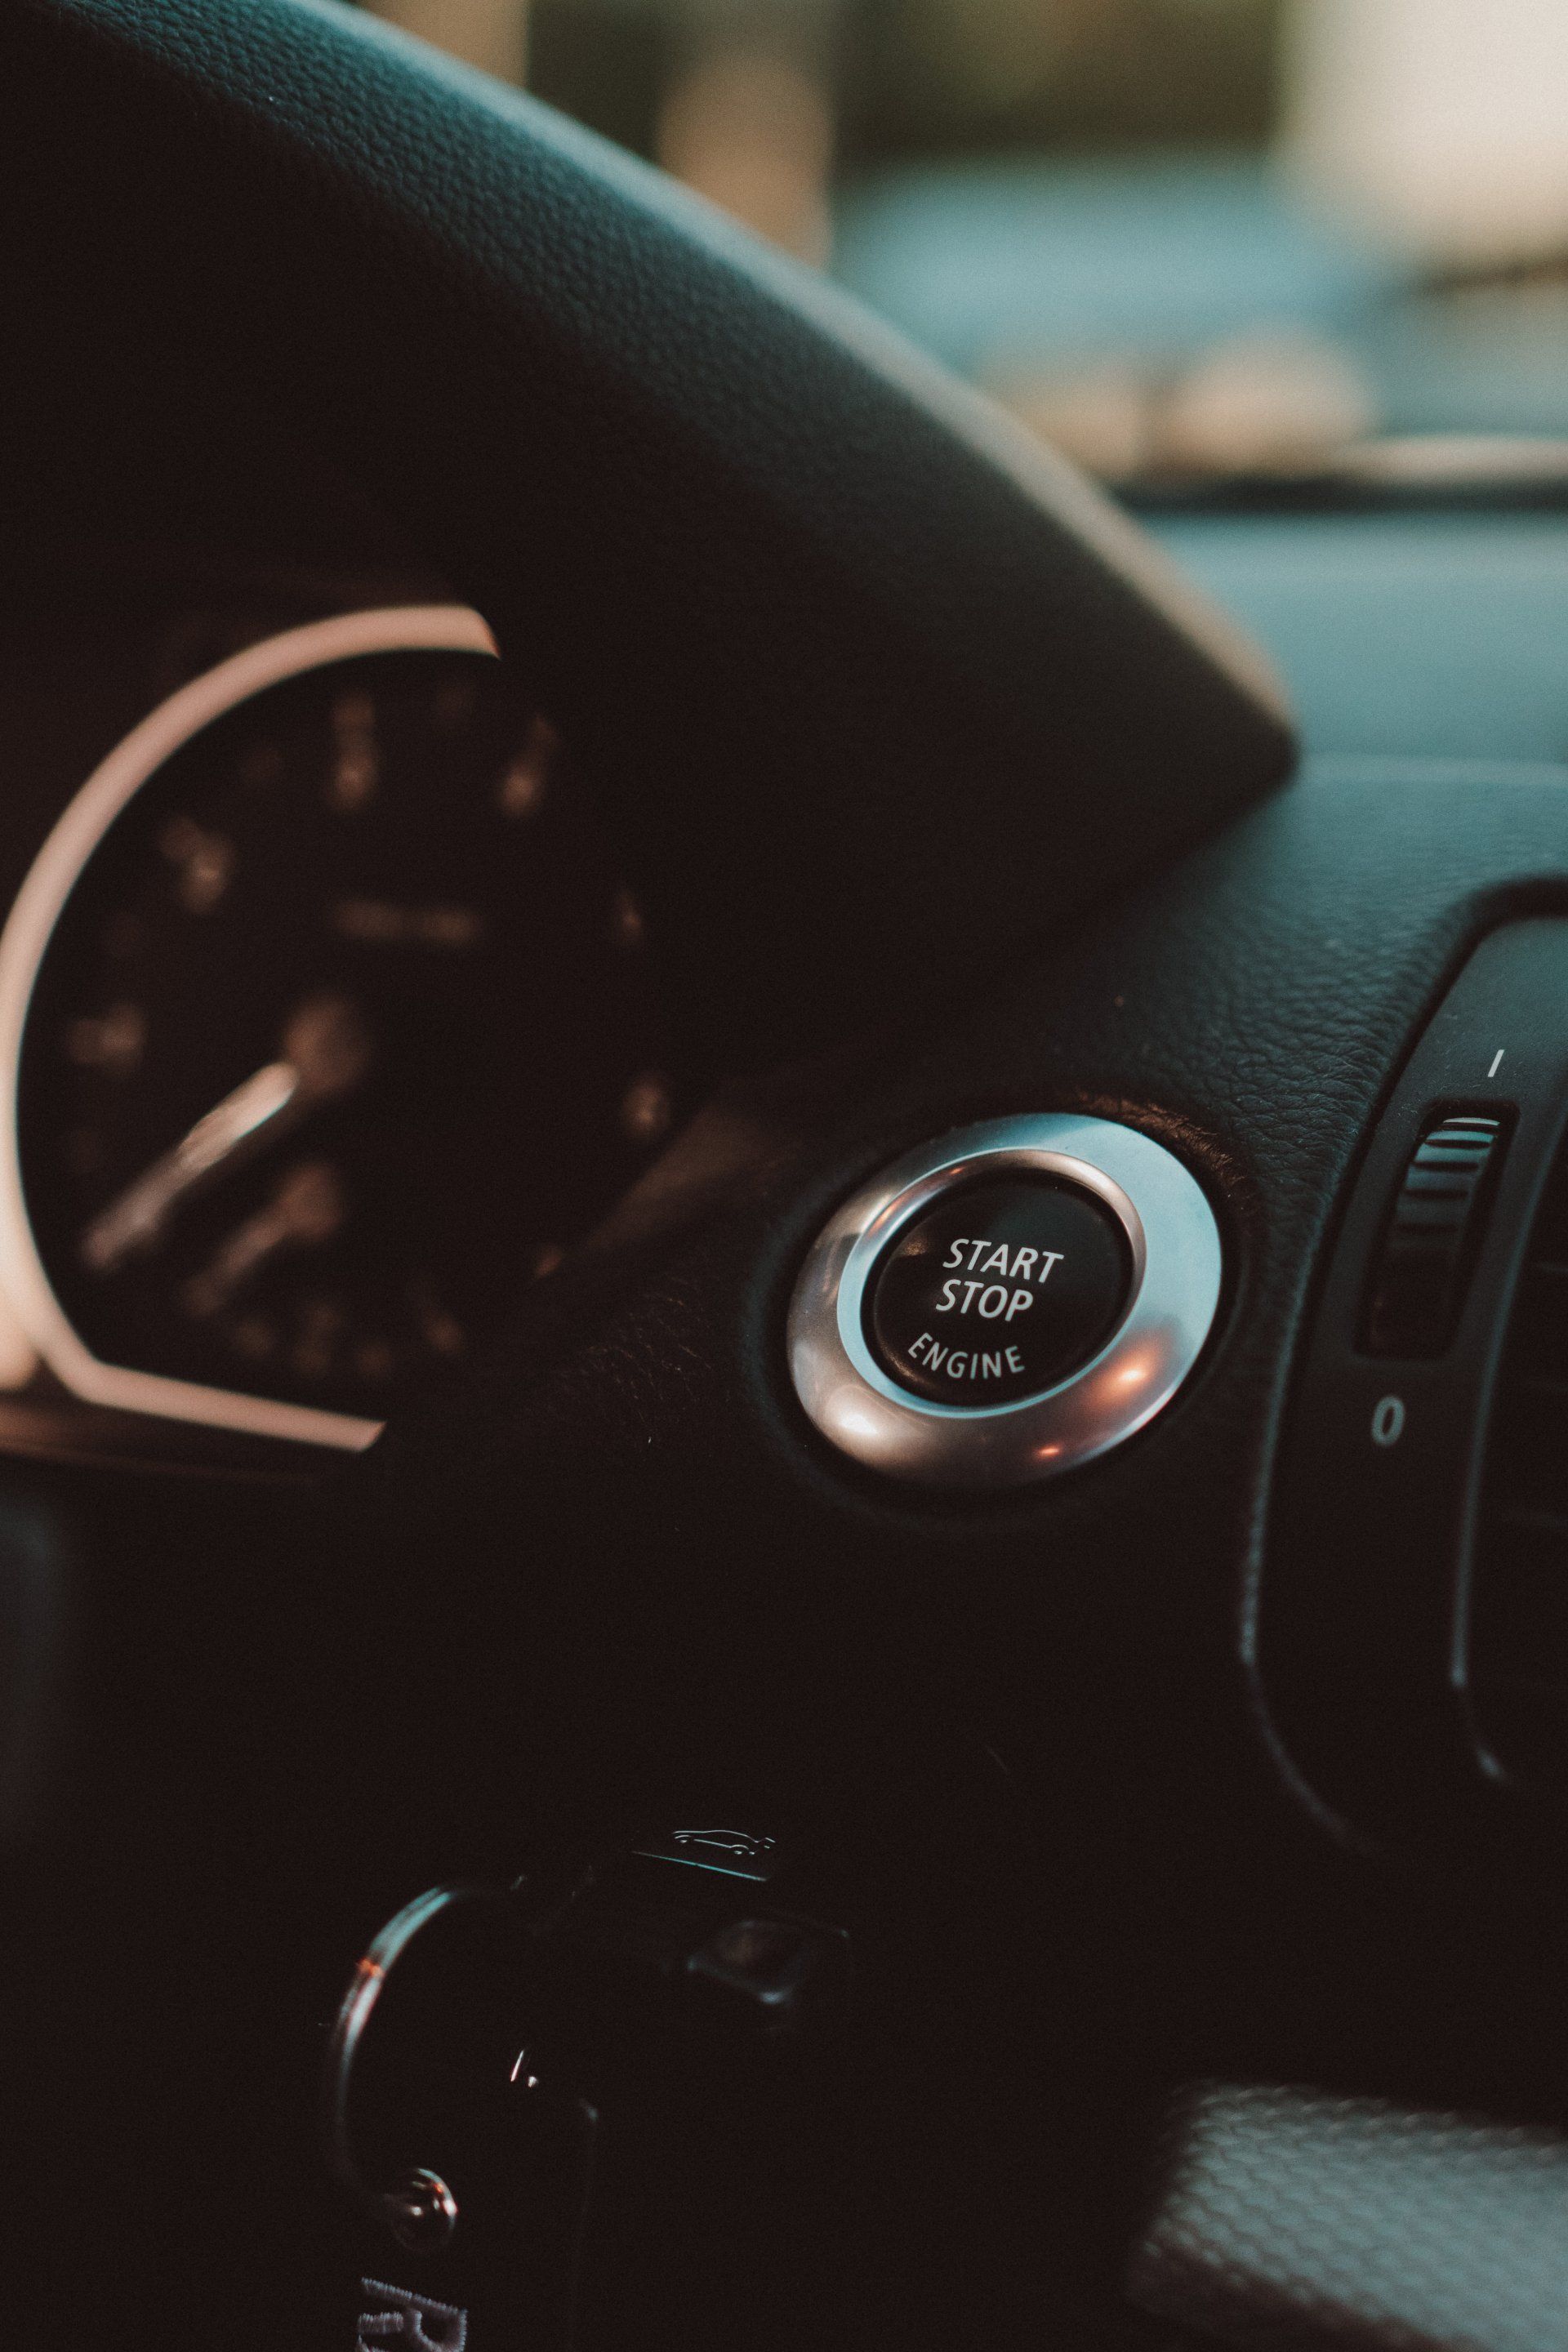 A close up of a car dashboard with a start button.